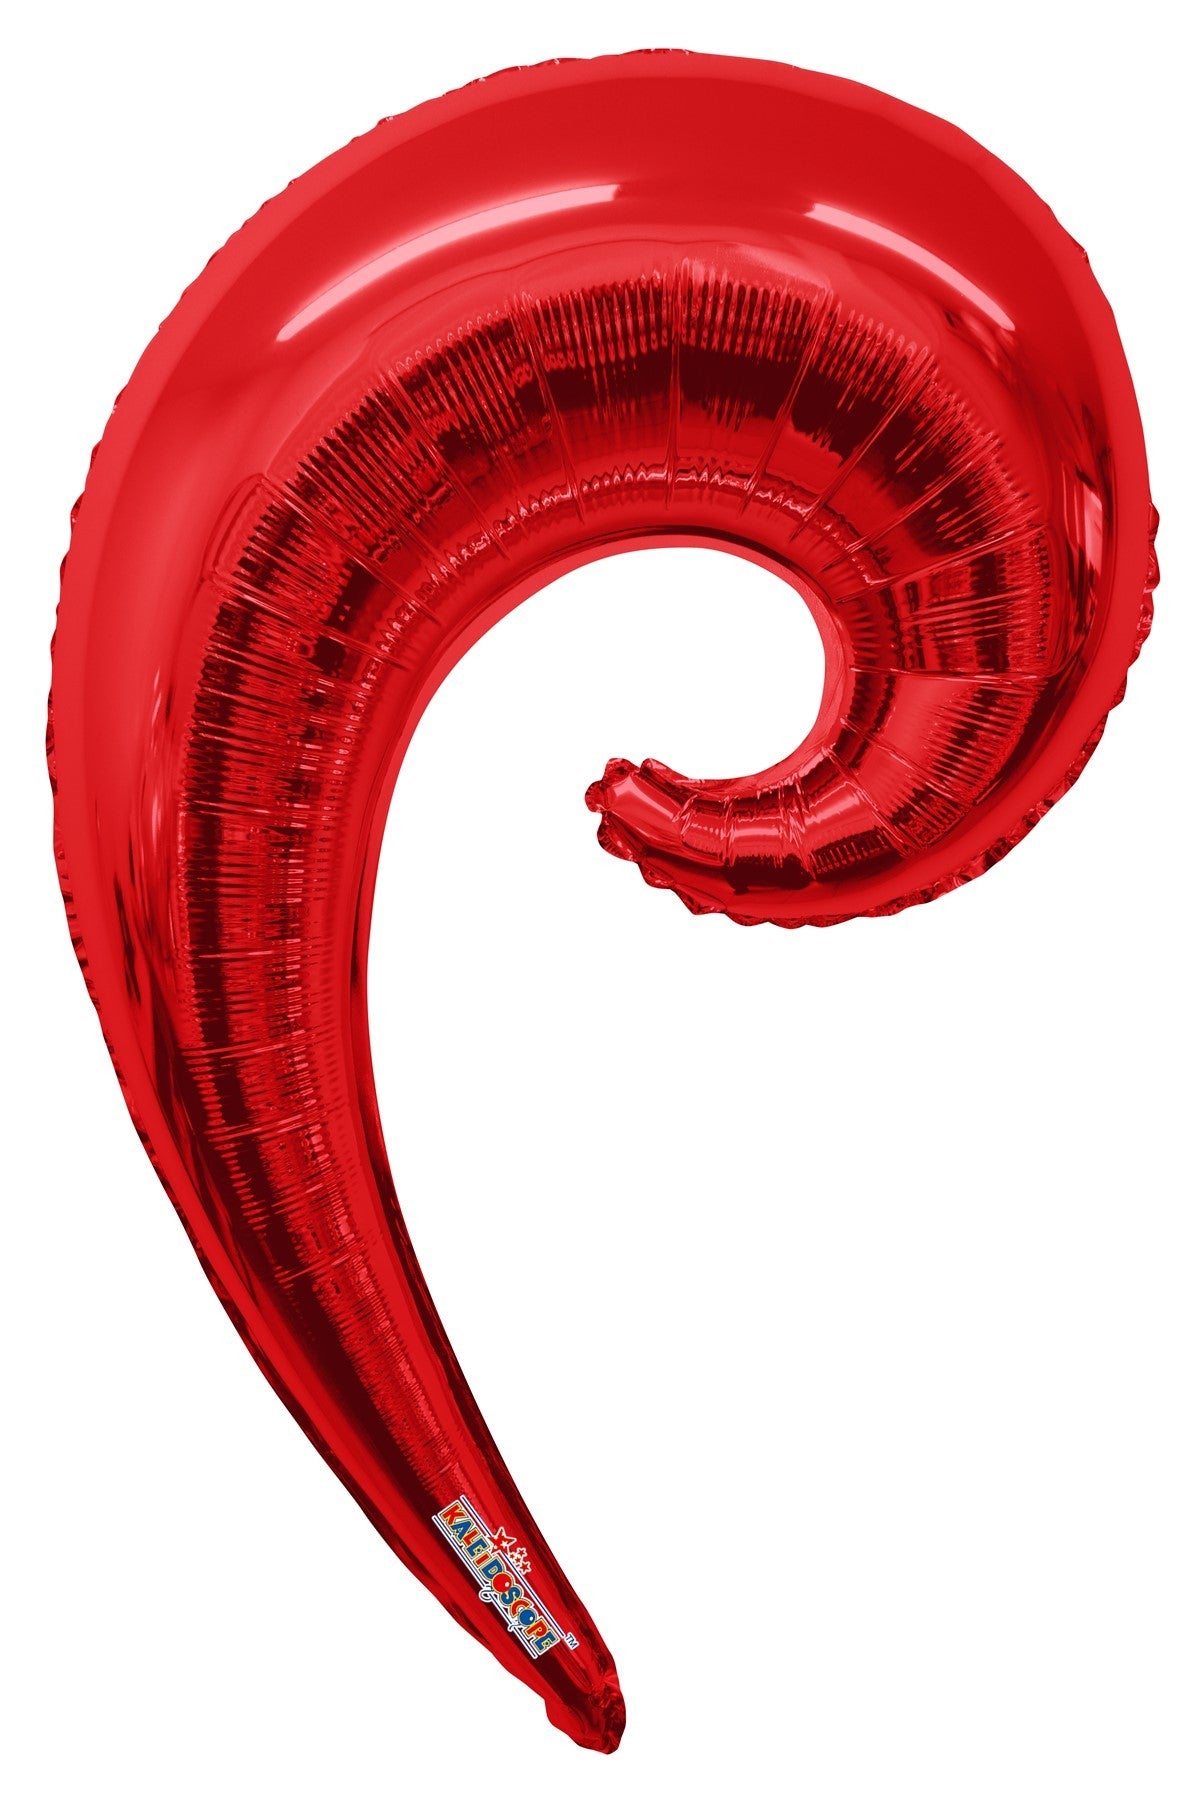 View Red Wave Balloon 36 inch information